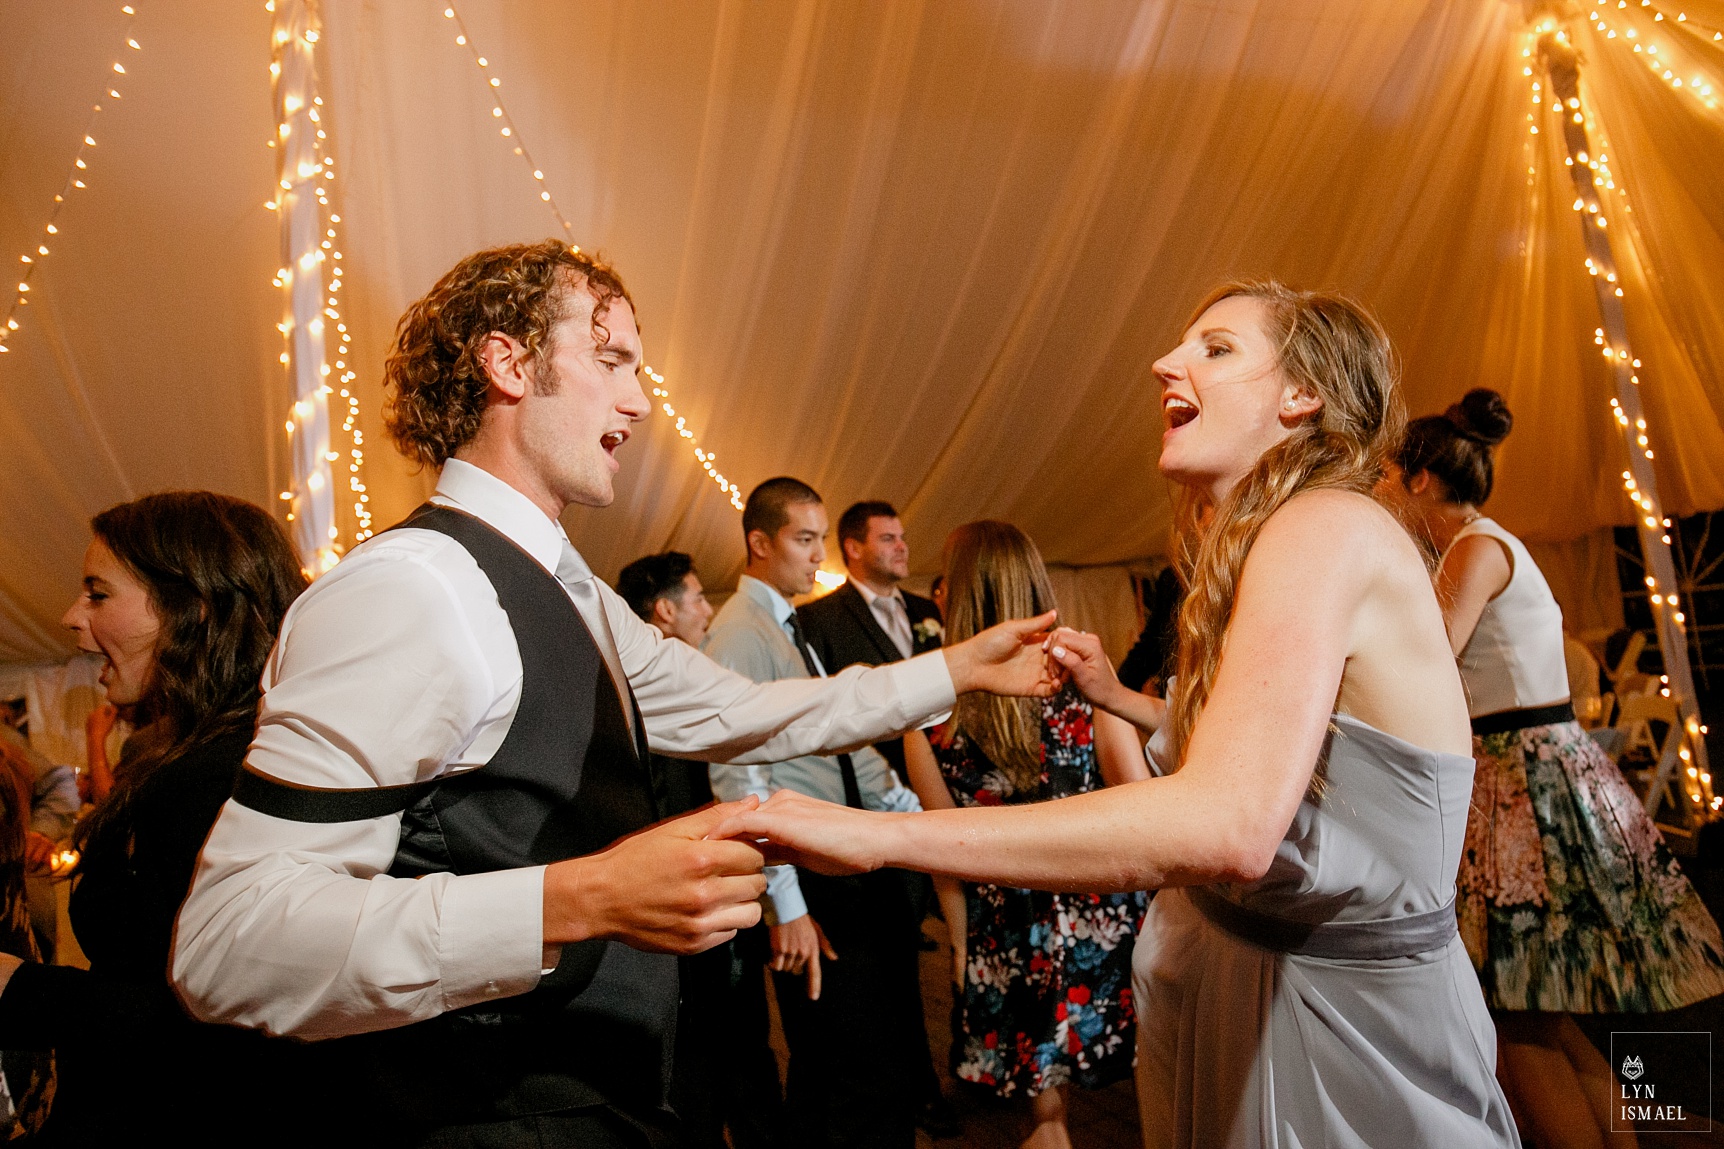 Dancing at a Knollwood Golf Club wedding in Ancaster, Ontario